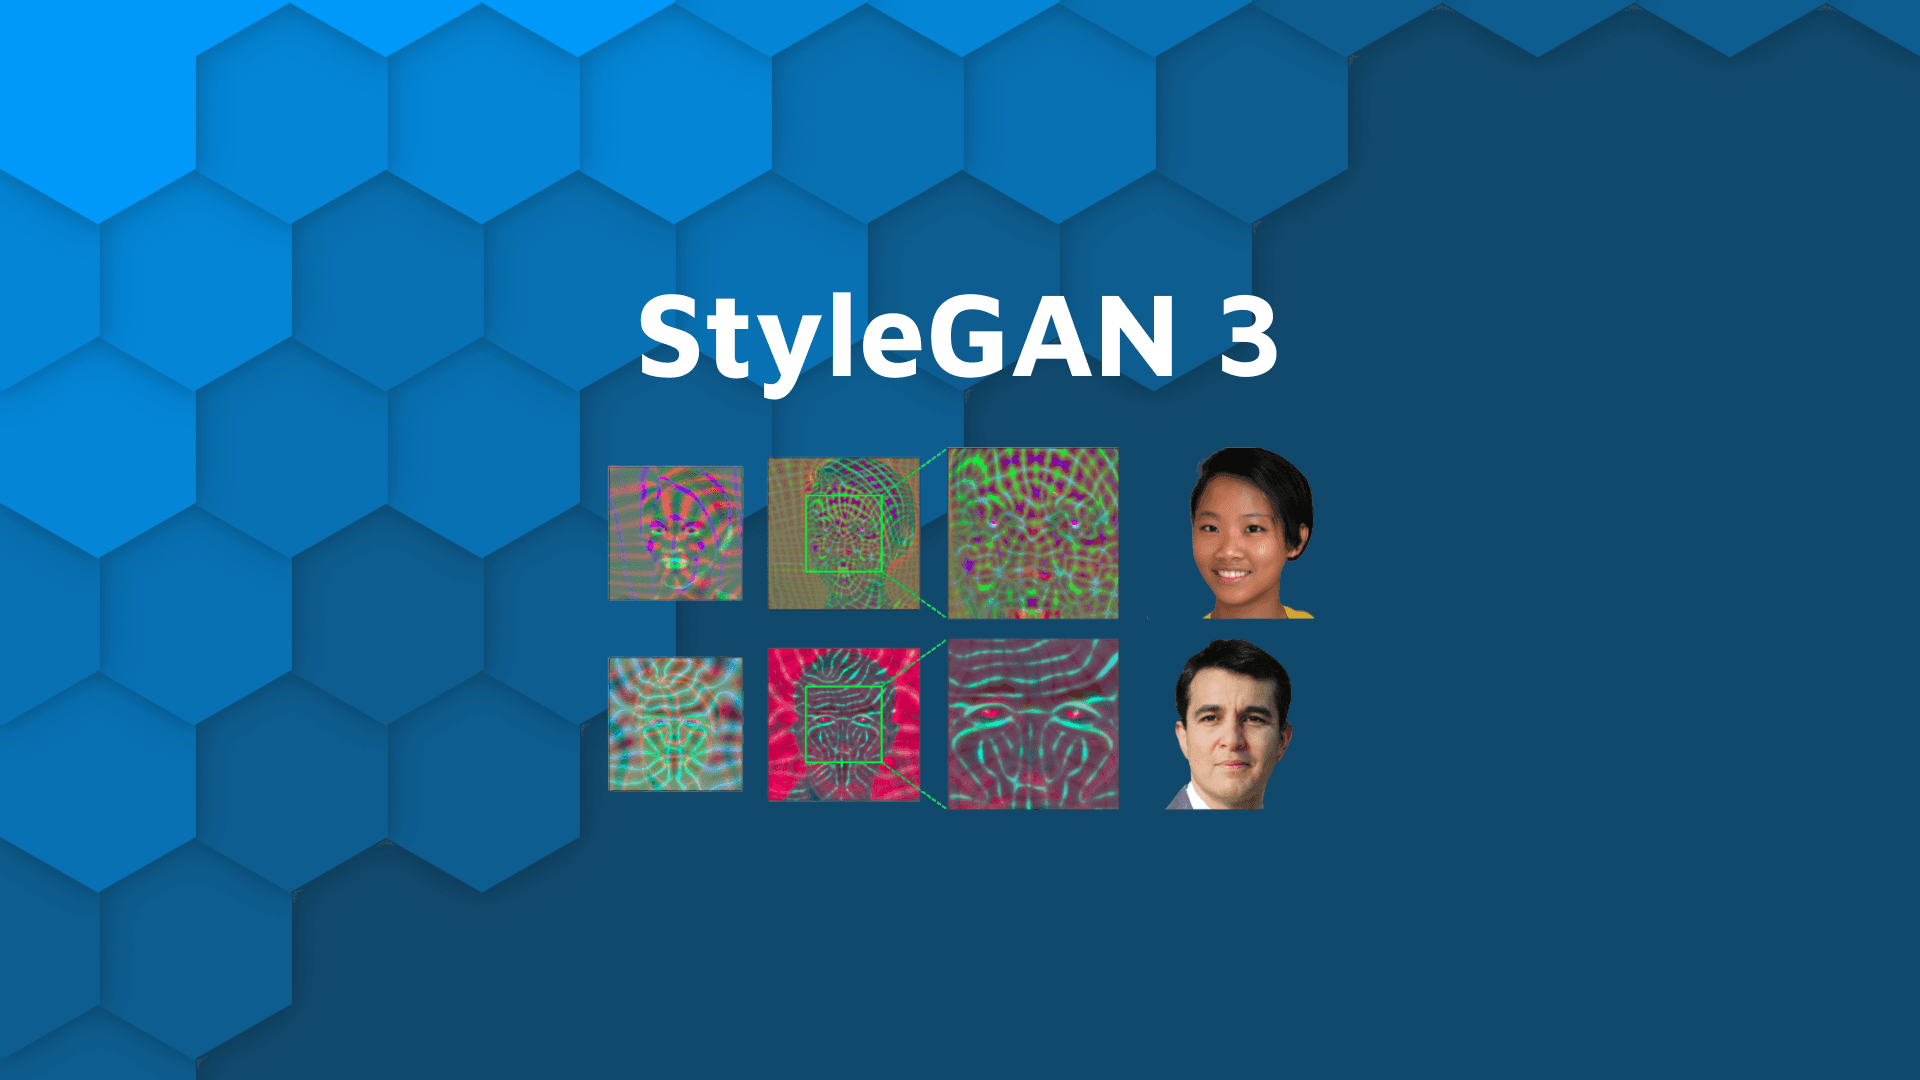 'styleGAN 3' with sample images